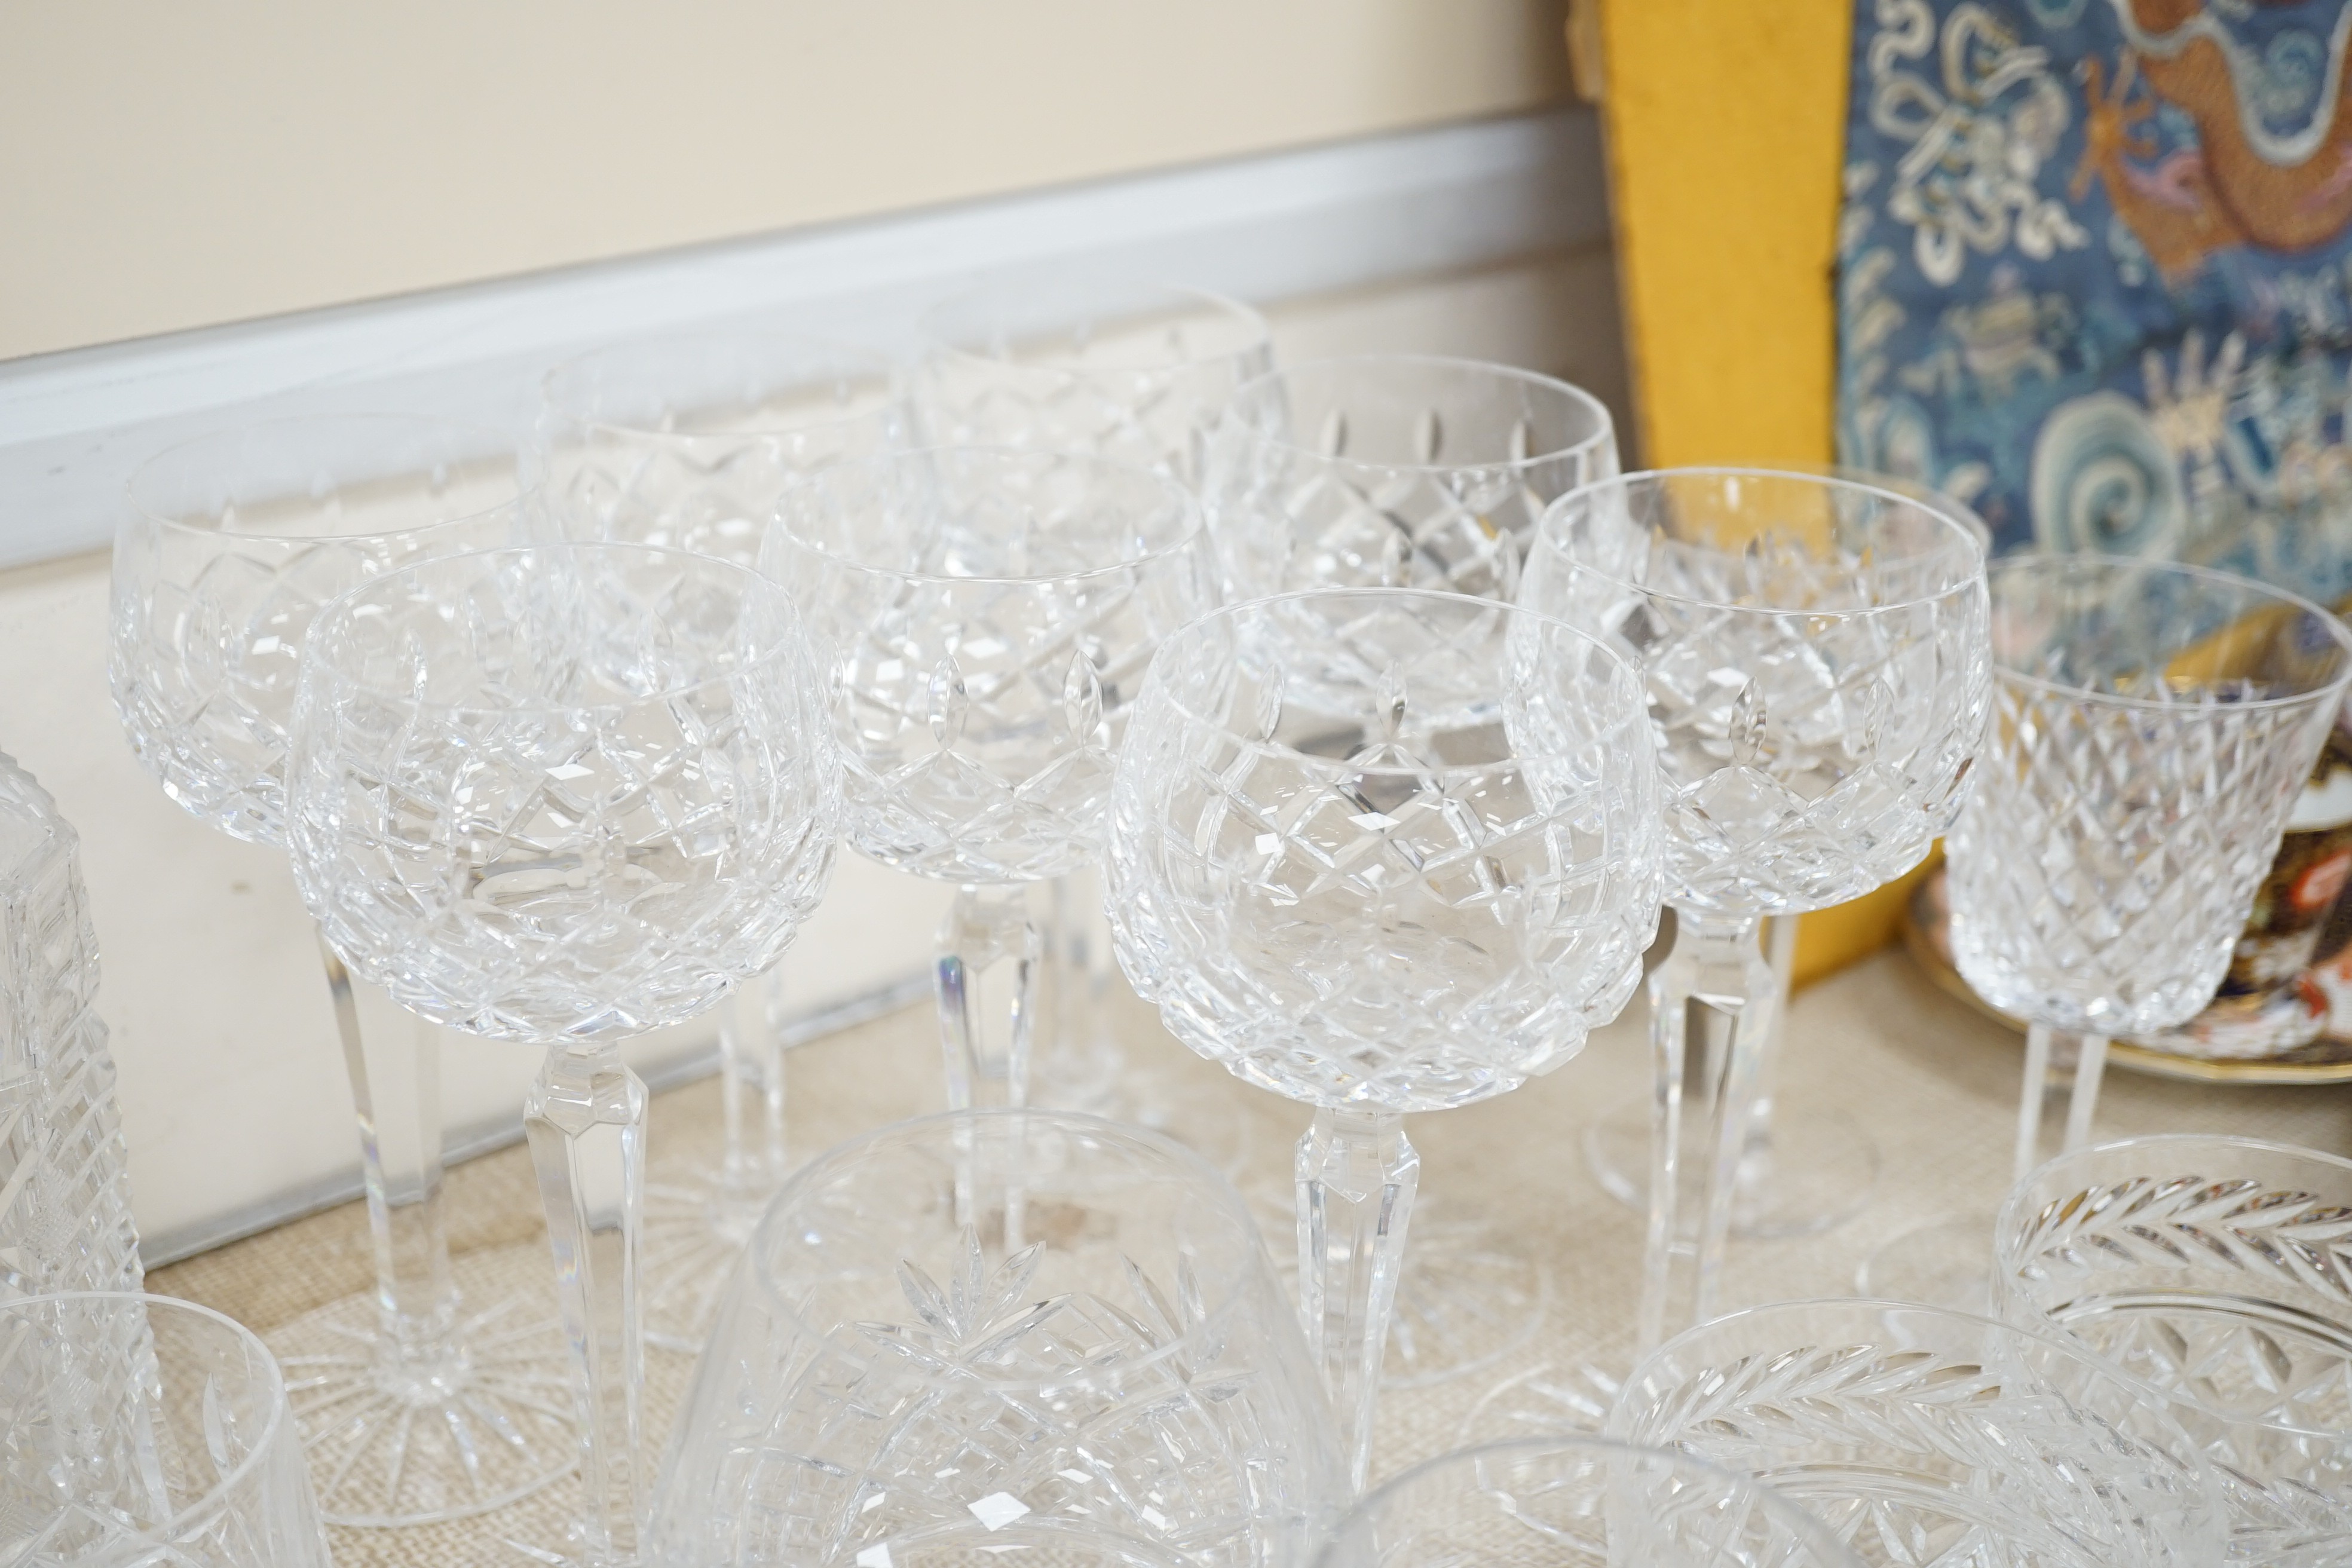 A part suite of Waterford drinking glassware in Alana pattern and others - Image 3 of 4